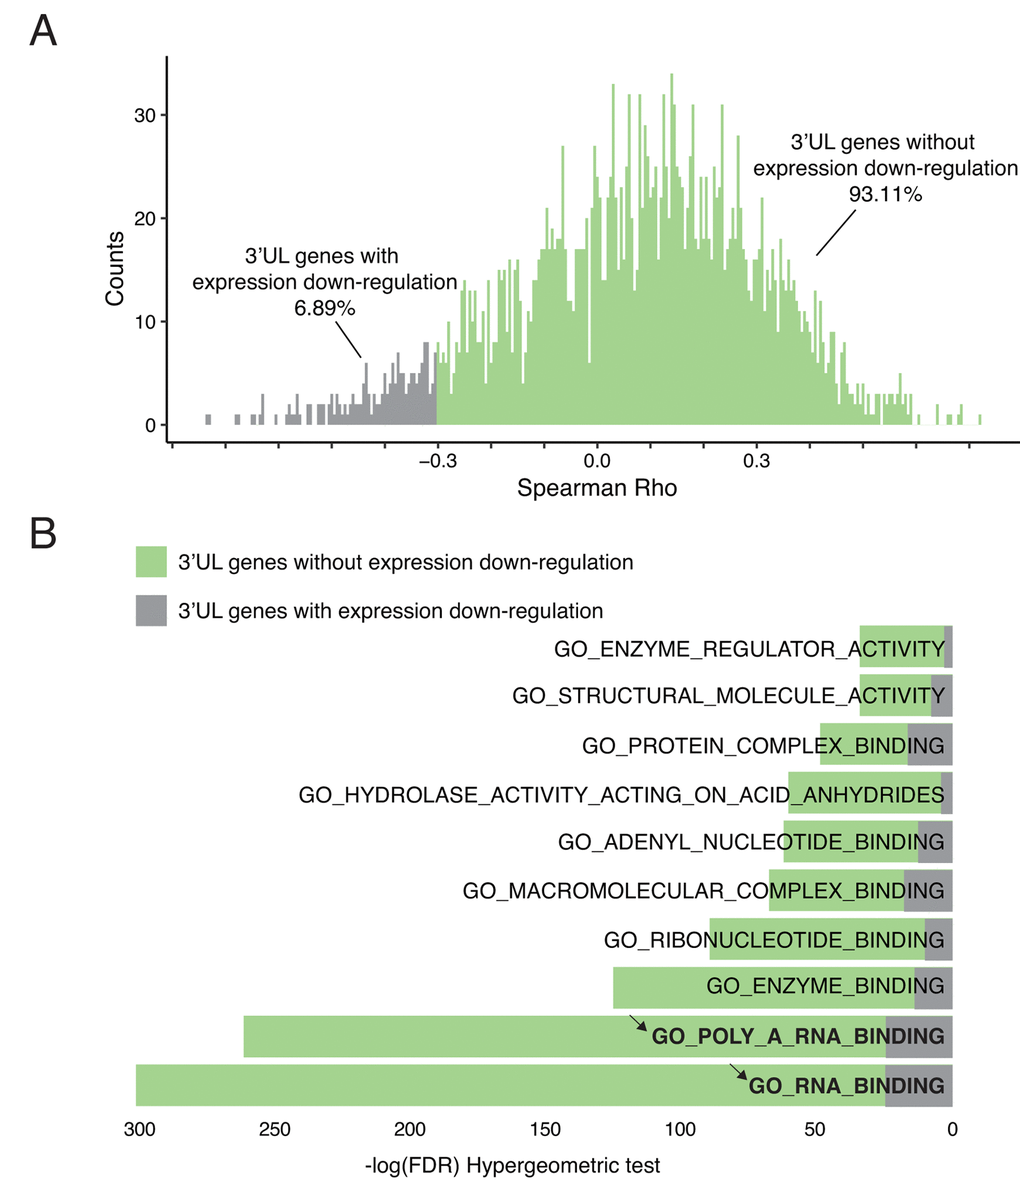 3’UTR-longer genes do not affect their own expressions. (A) 3’UL genes without direct downregulation expression predominate. Only 6.89% of 3’UL genes show direct down-regulated downstream expression. The downregulation was defined as Spearman Rho B) 3’UL genes without down-regulated gene expression control more aspects of molecular functions (hypergeometric test, retrieved from Molecular Signature Database). RNA-binding ranks highest in the function enrichment computation.